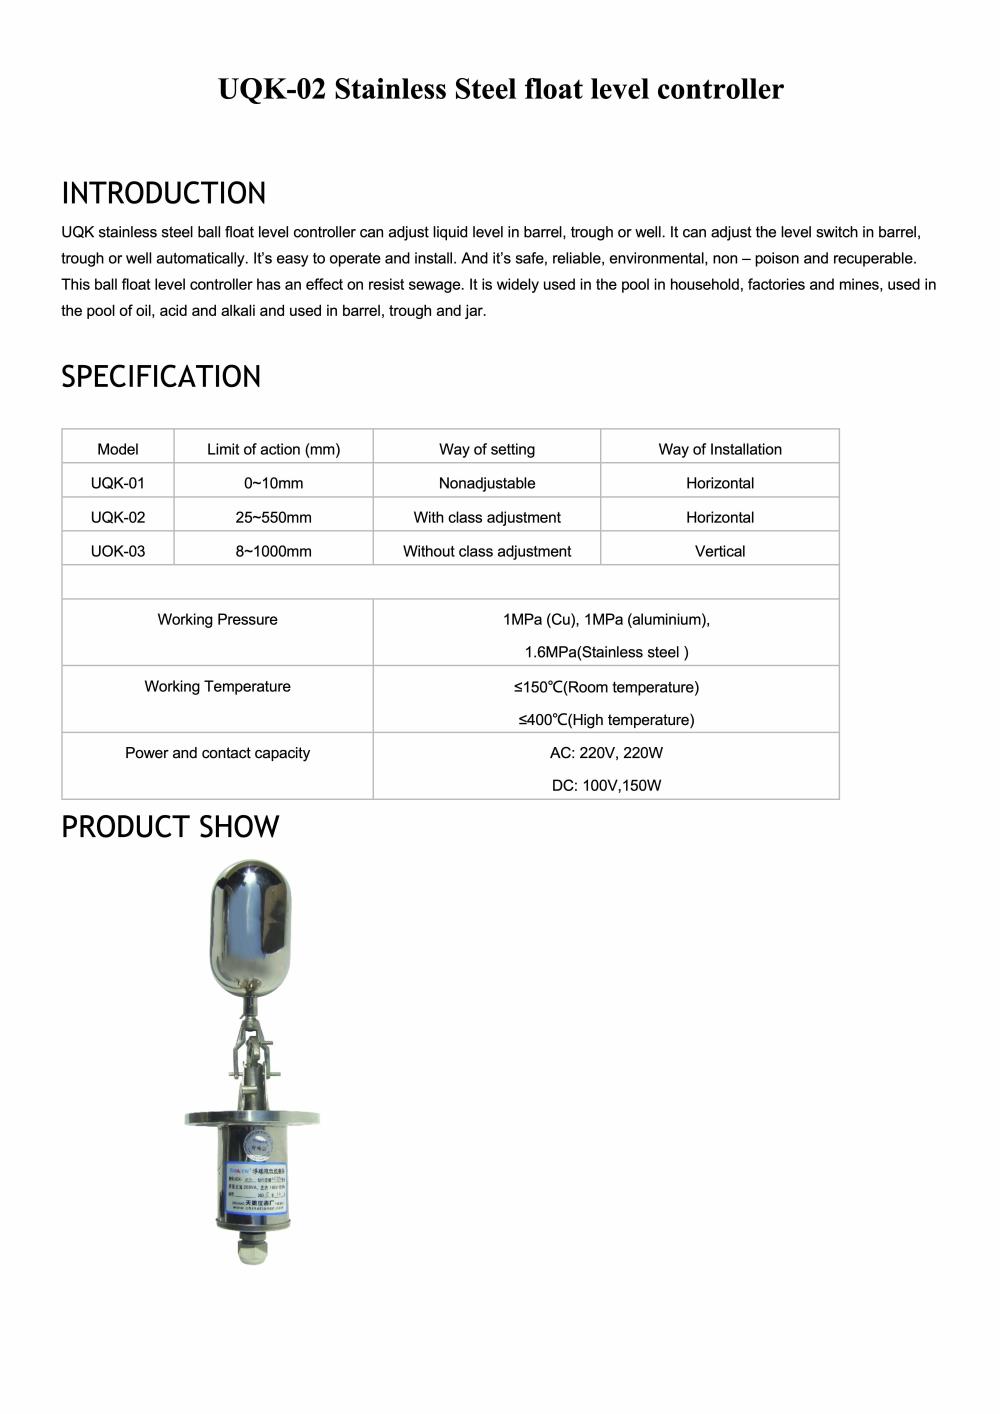 Stainless Steel float level controller